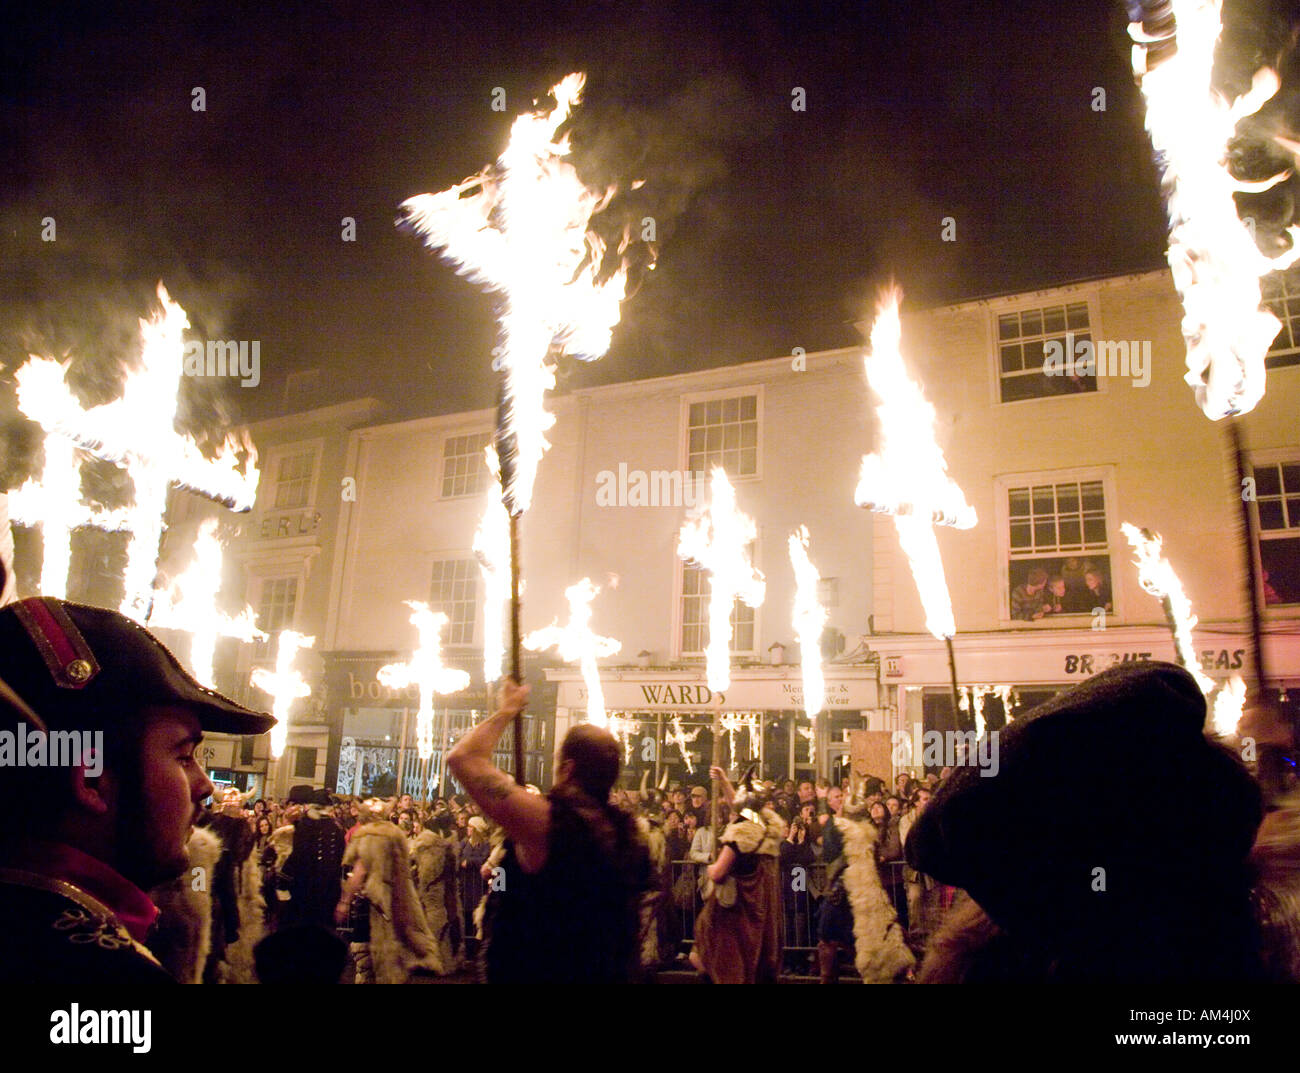 Burning Crosses At The Procession The Lewes Fire Festival Sussex UK Europe Stock Photo